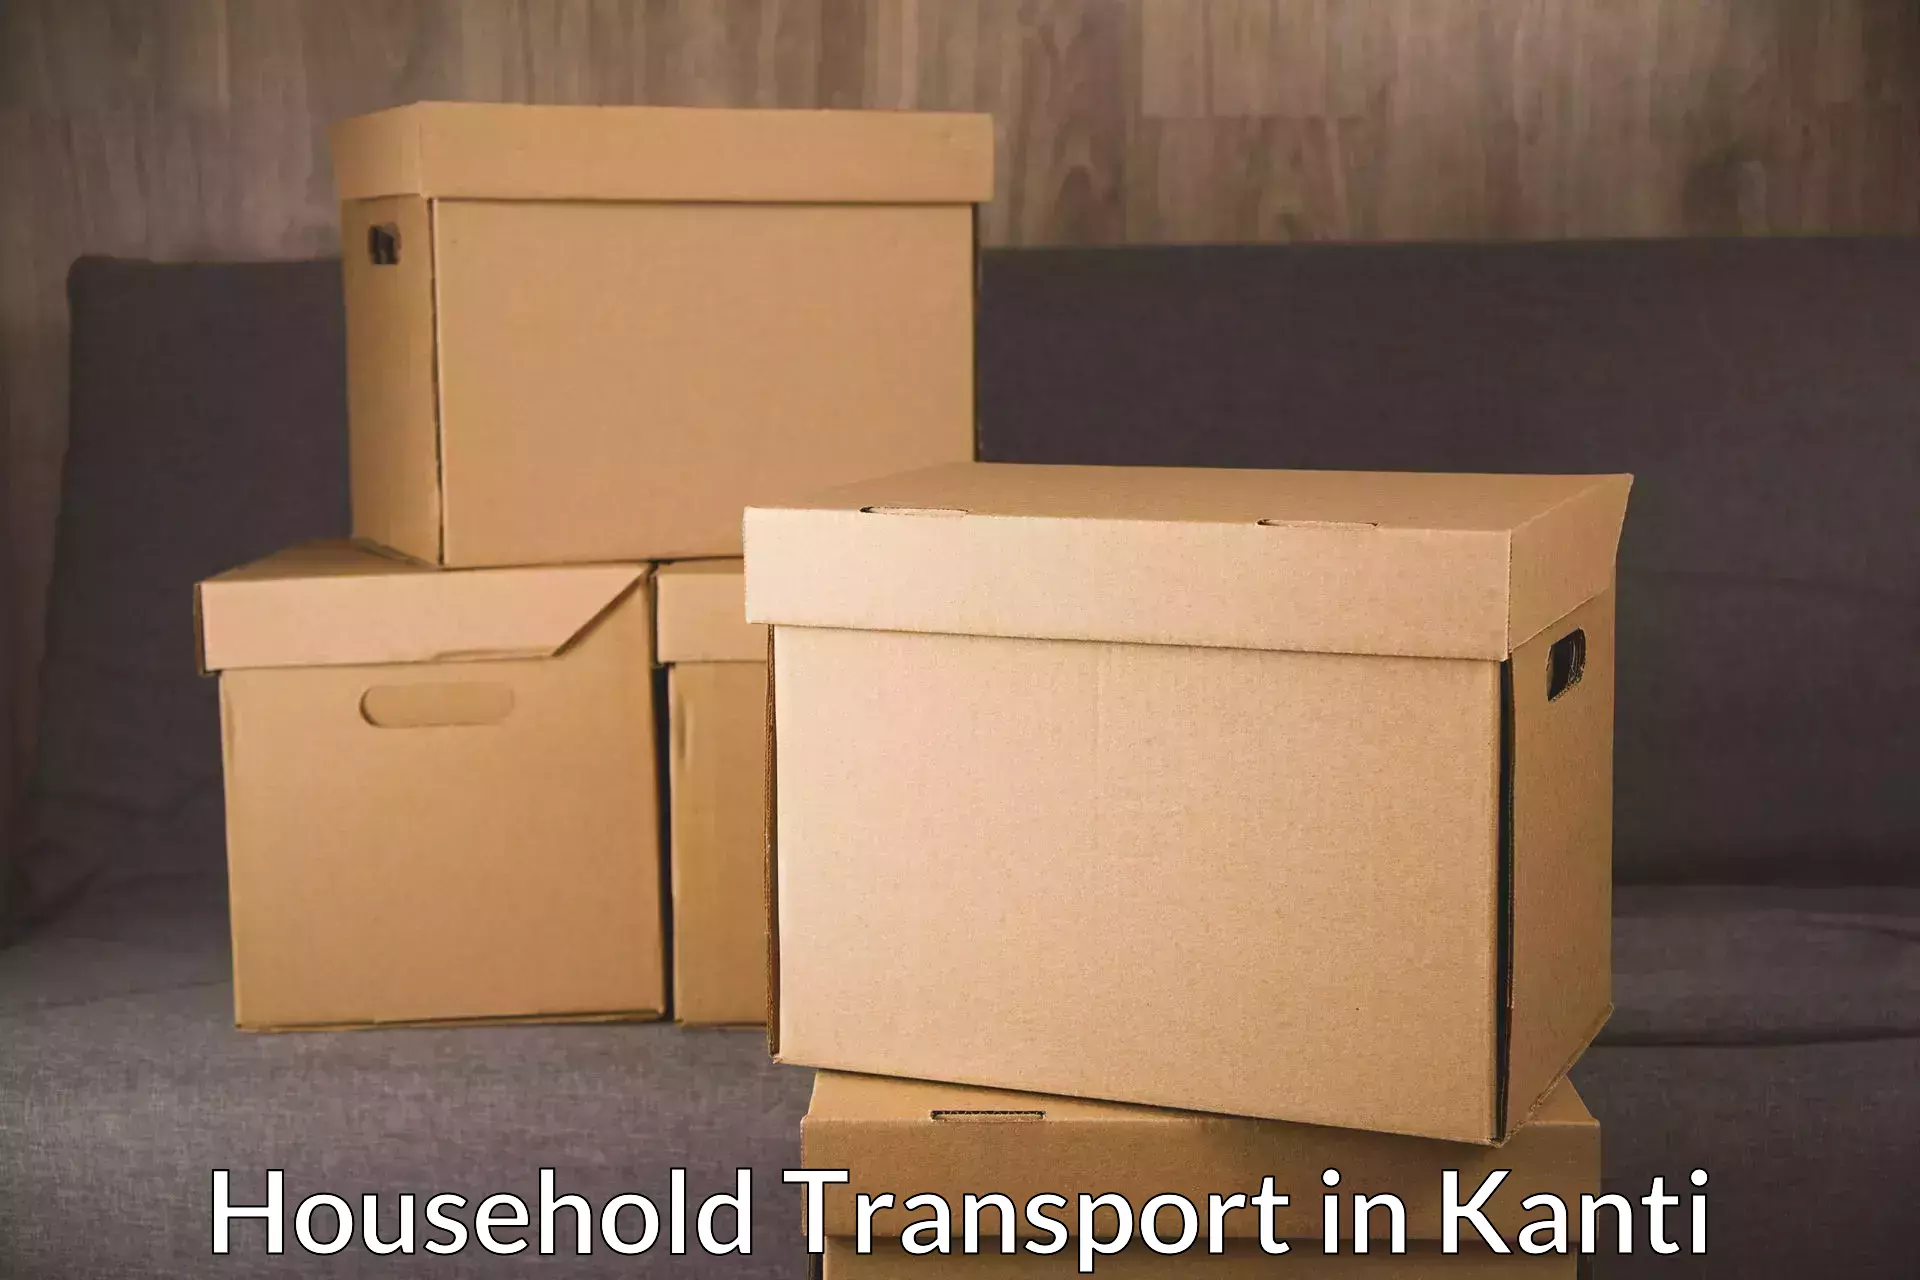 Furniture moving assistance in Kanti